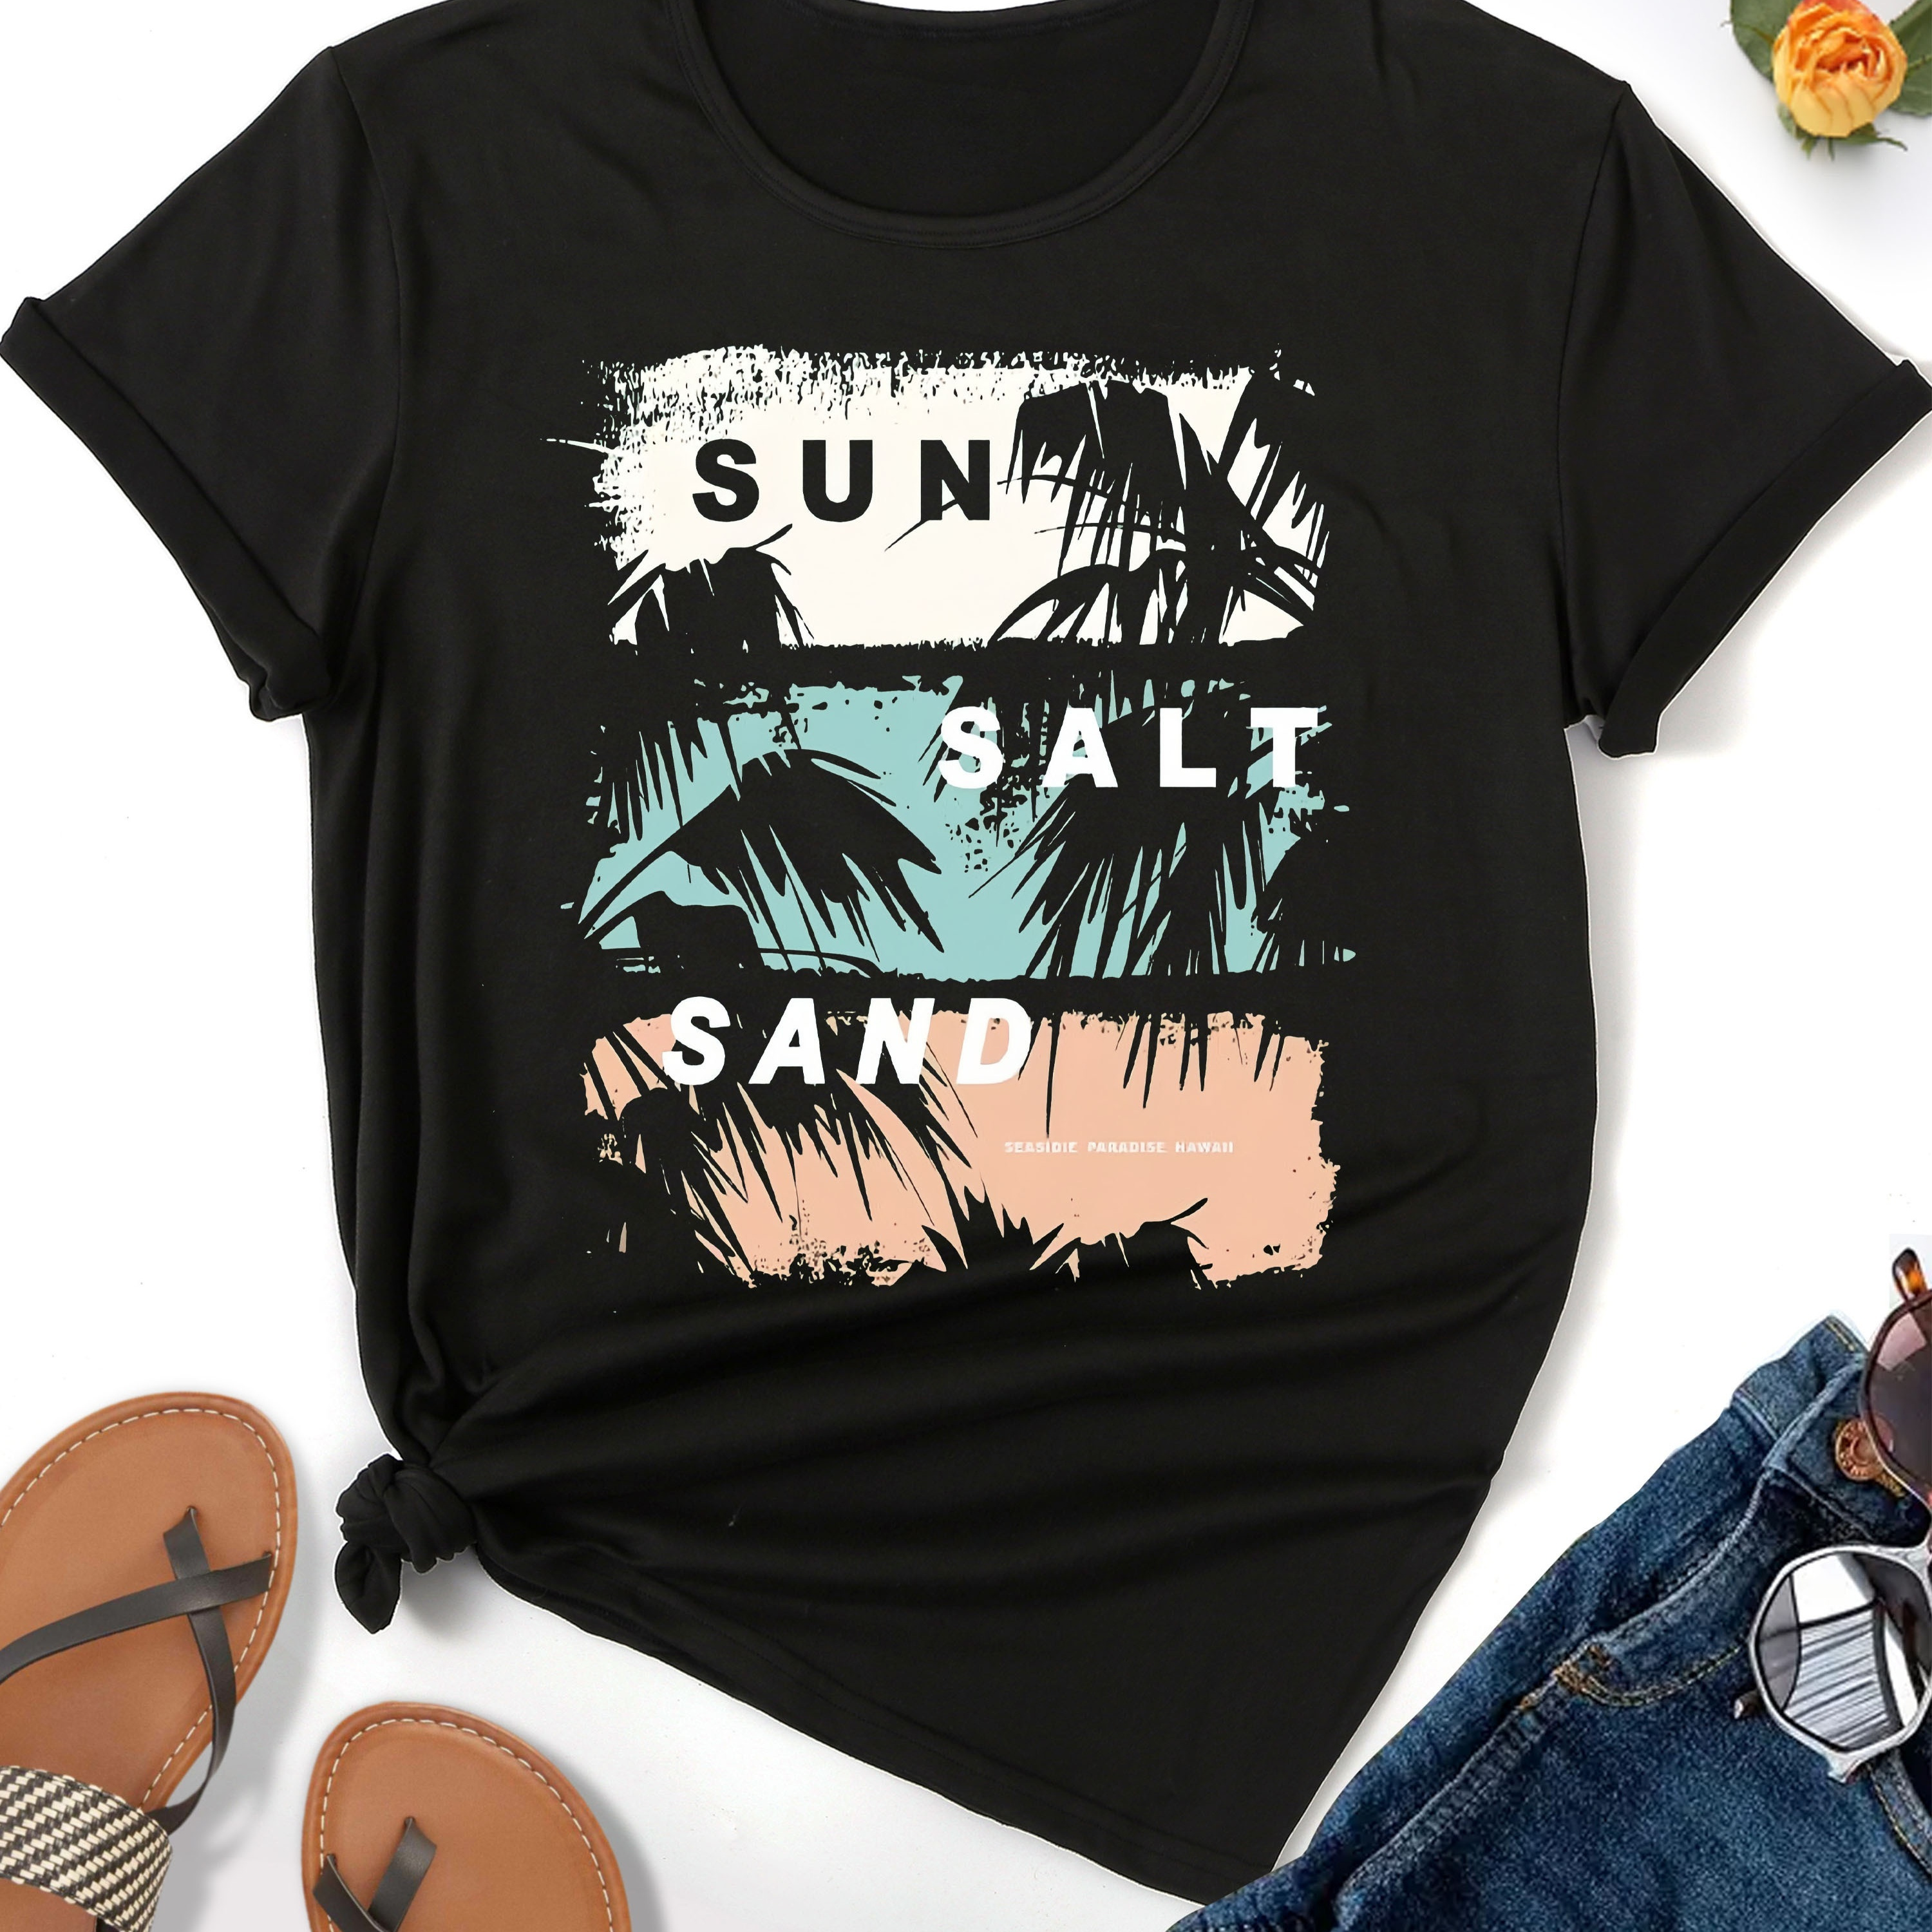 

Coconut Tree & Beach Print T-shirt, Casual Crew Neck Short Sleeve Top For Spring & Summer, Women's Clothing